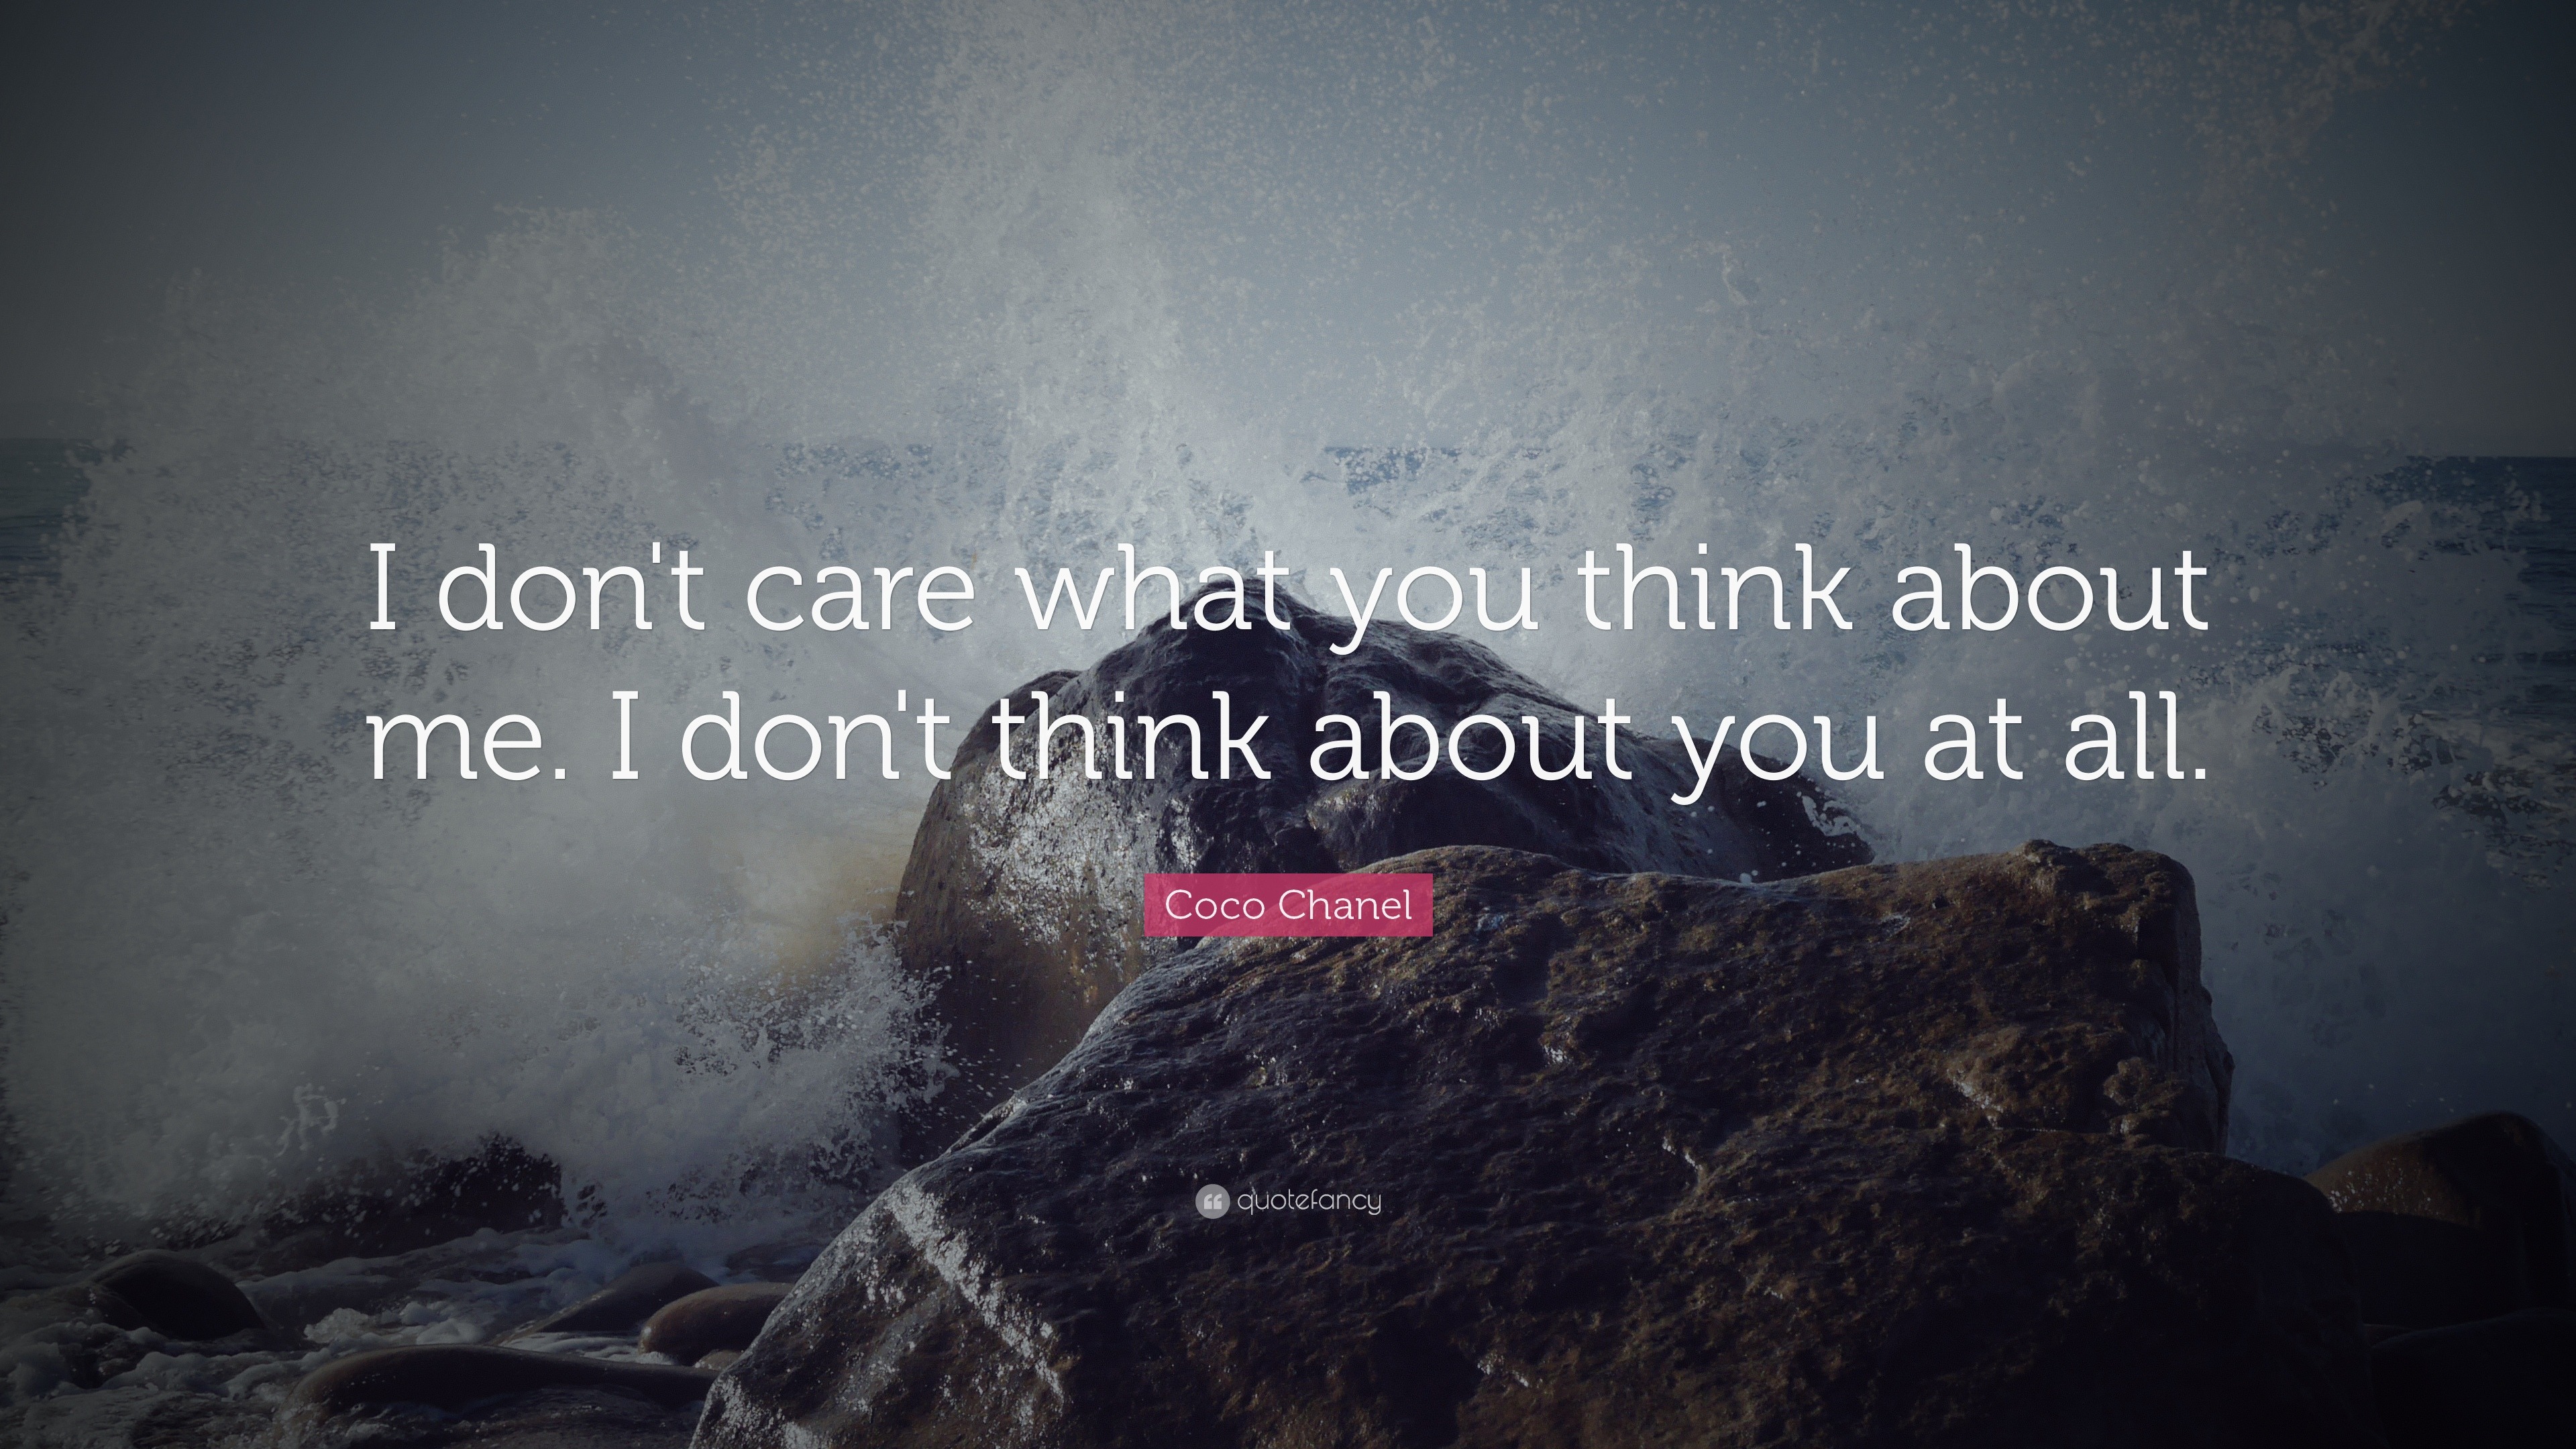 Coco Chanel Quote: “I don't care what you think about me. I don't think